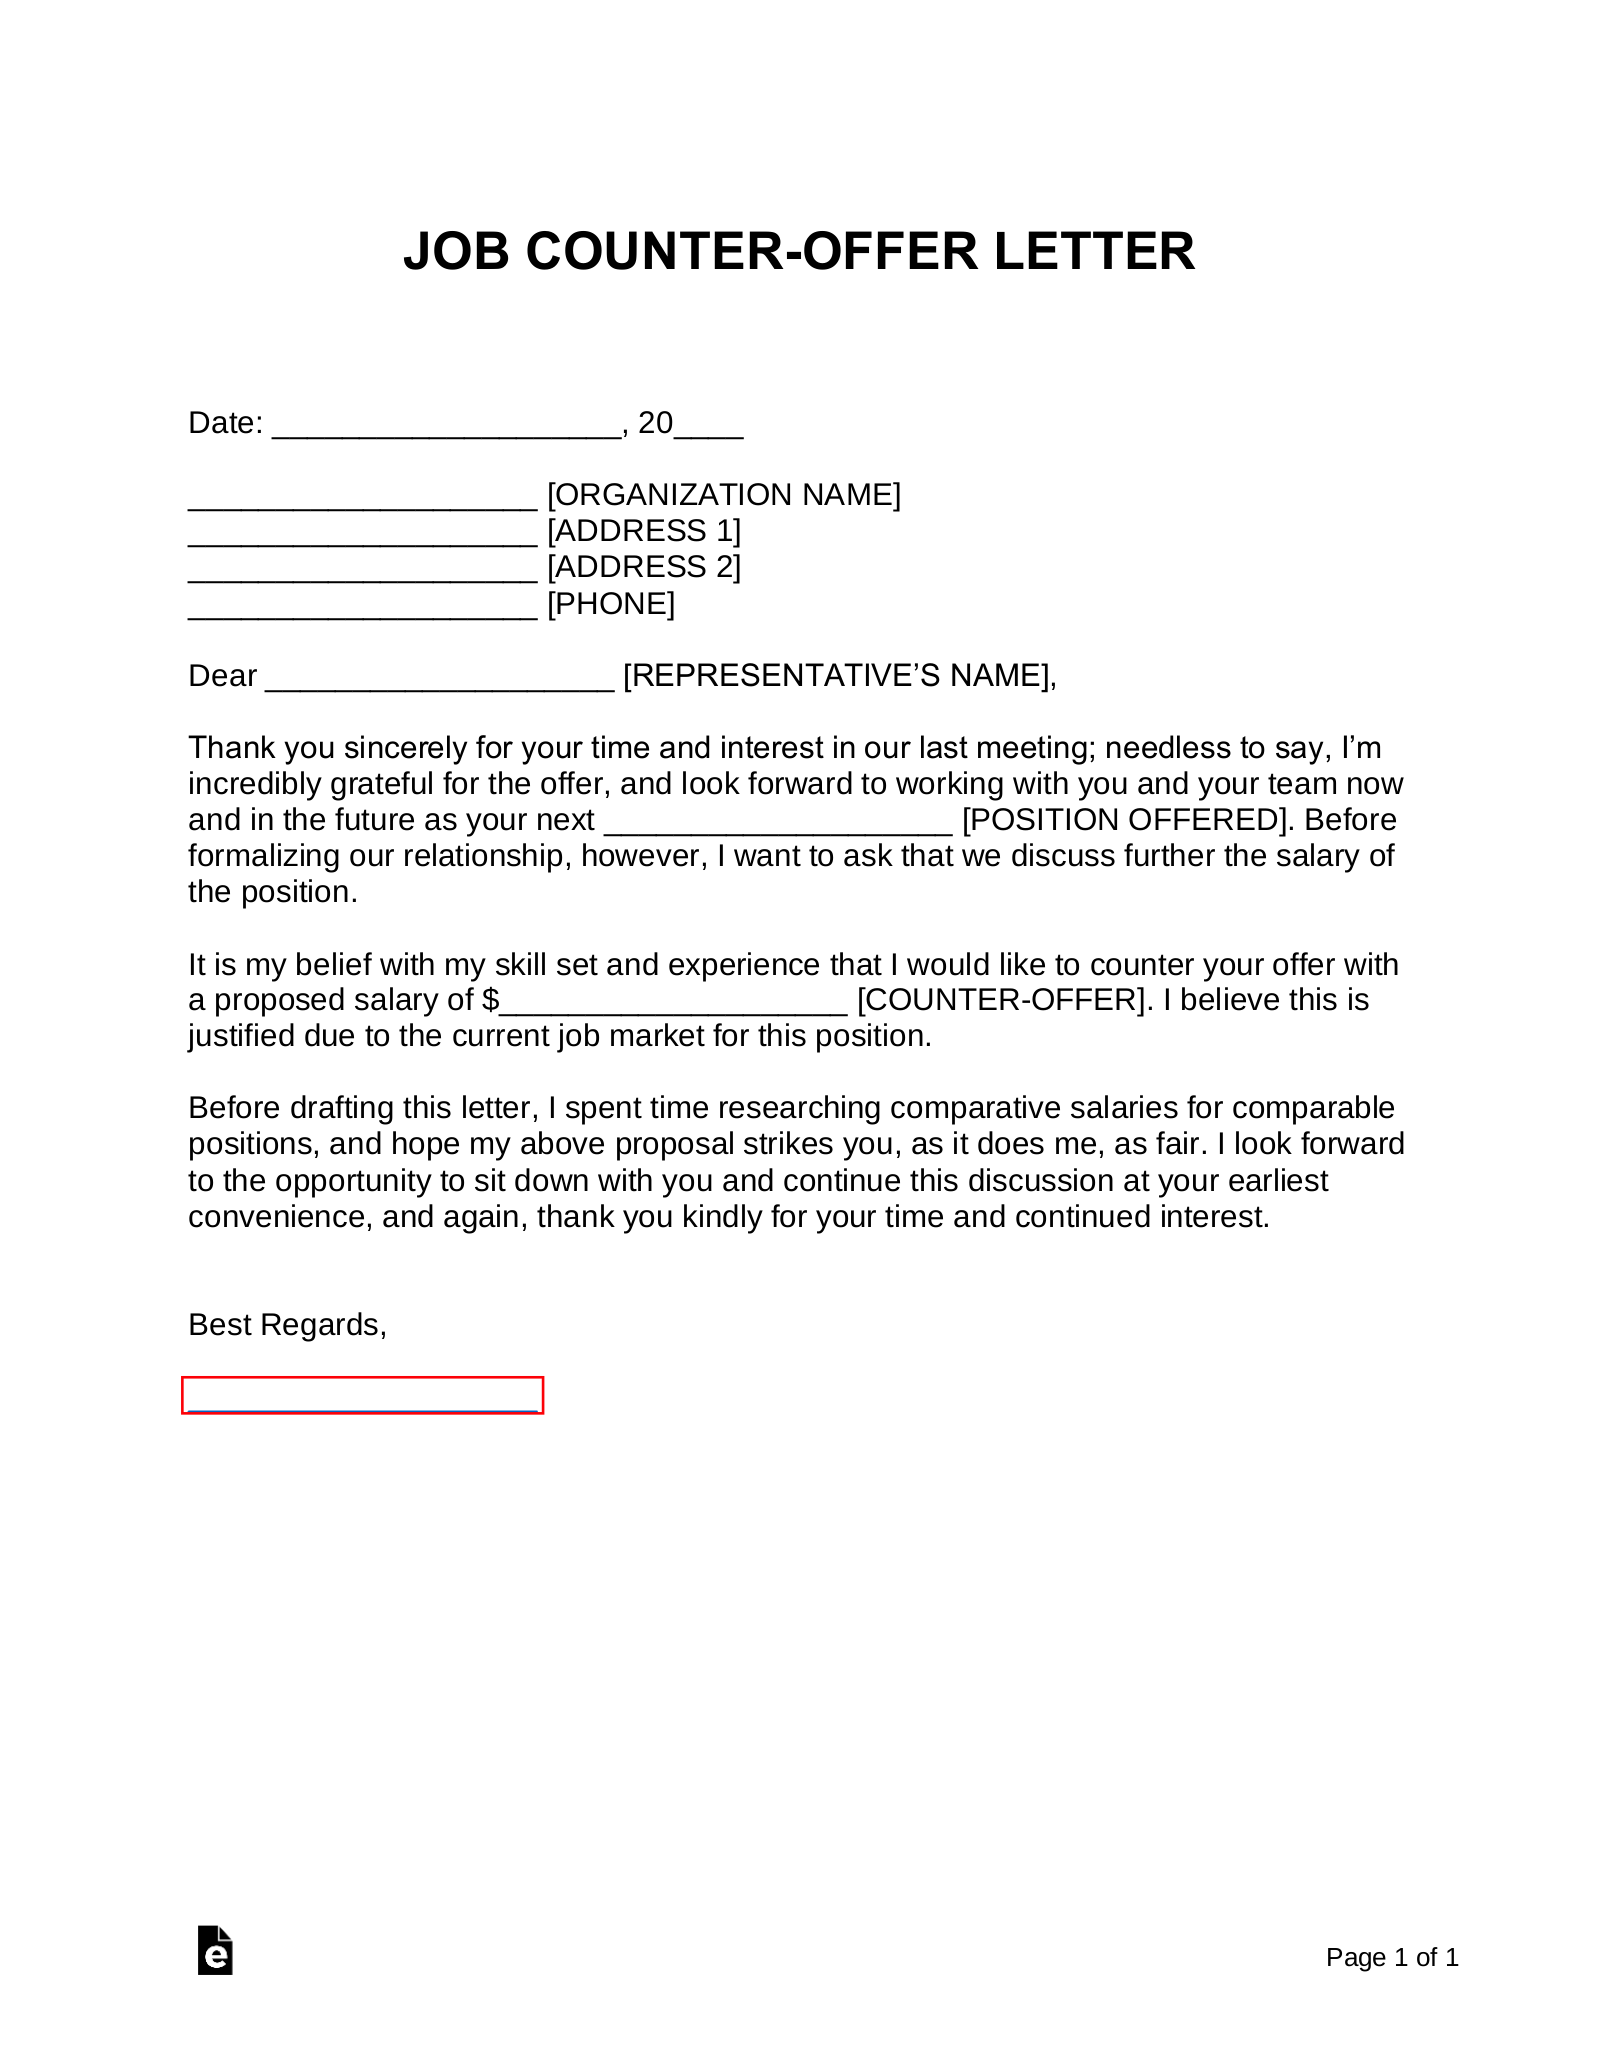 counter-offer-letter-template-samples-letter-template-collection-my